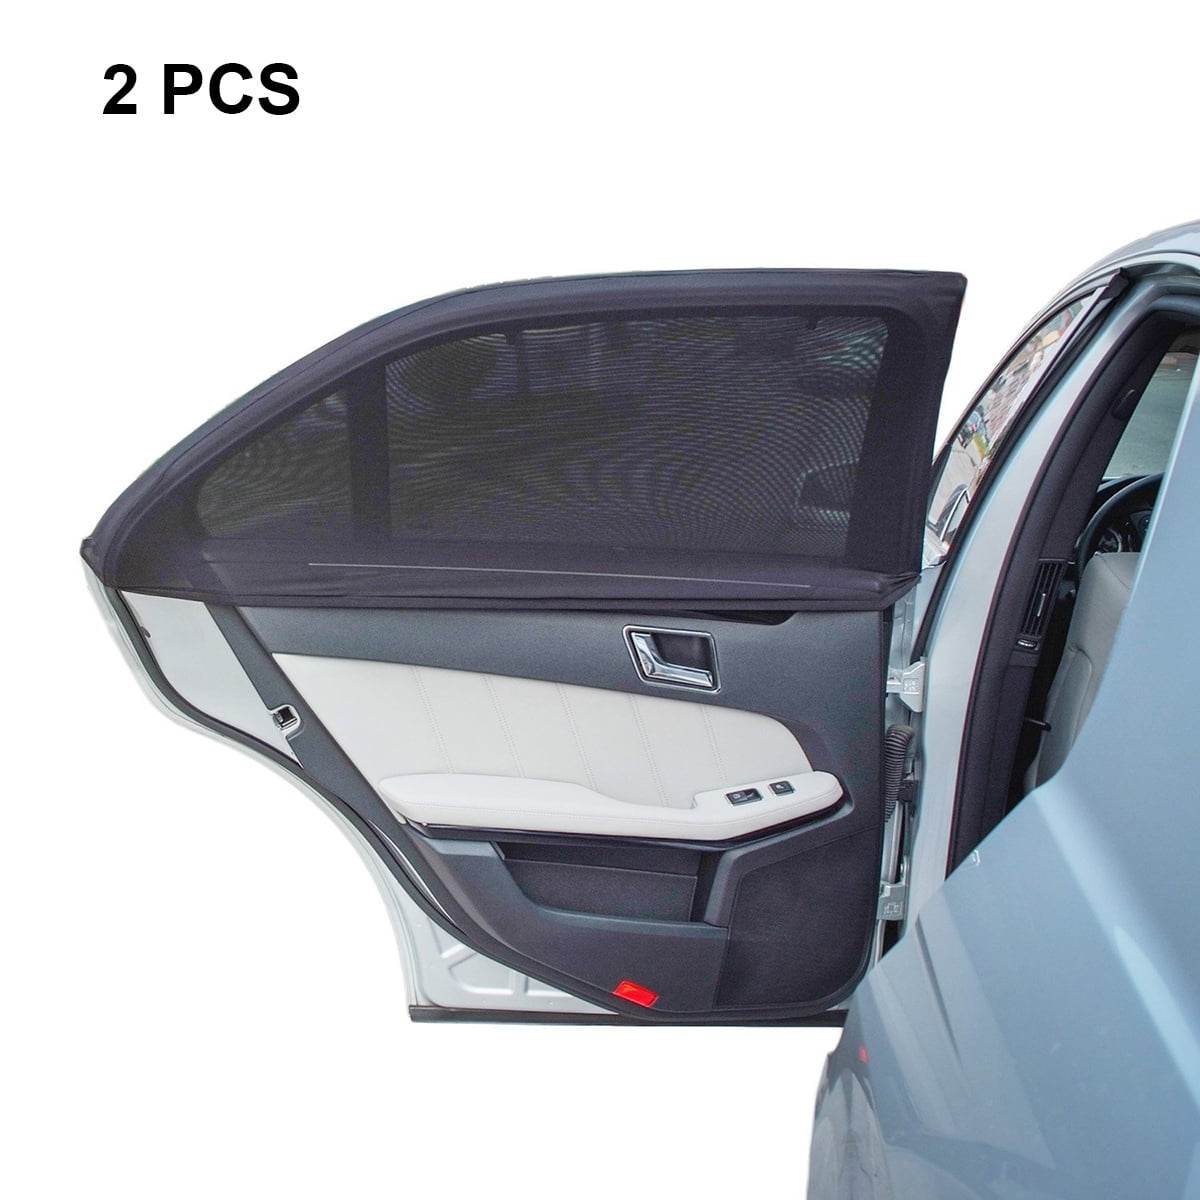 of Cars－Protect Kids Pet from The Sun,UV Rays－2 Pack MerryXD Car Window Shade,【2019 Upgrade Version】 Breathable Mesh Car Rear Side Window Shade Cover Full Windows－Universal Fit for Most 95% 